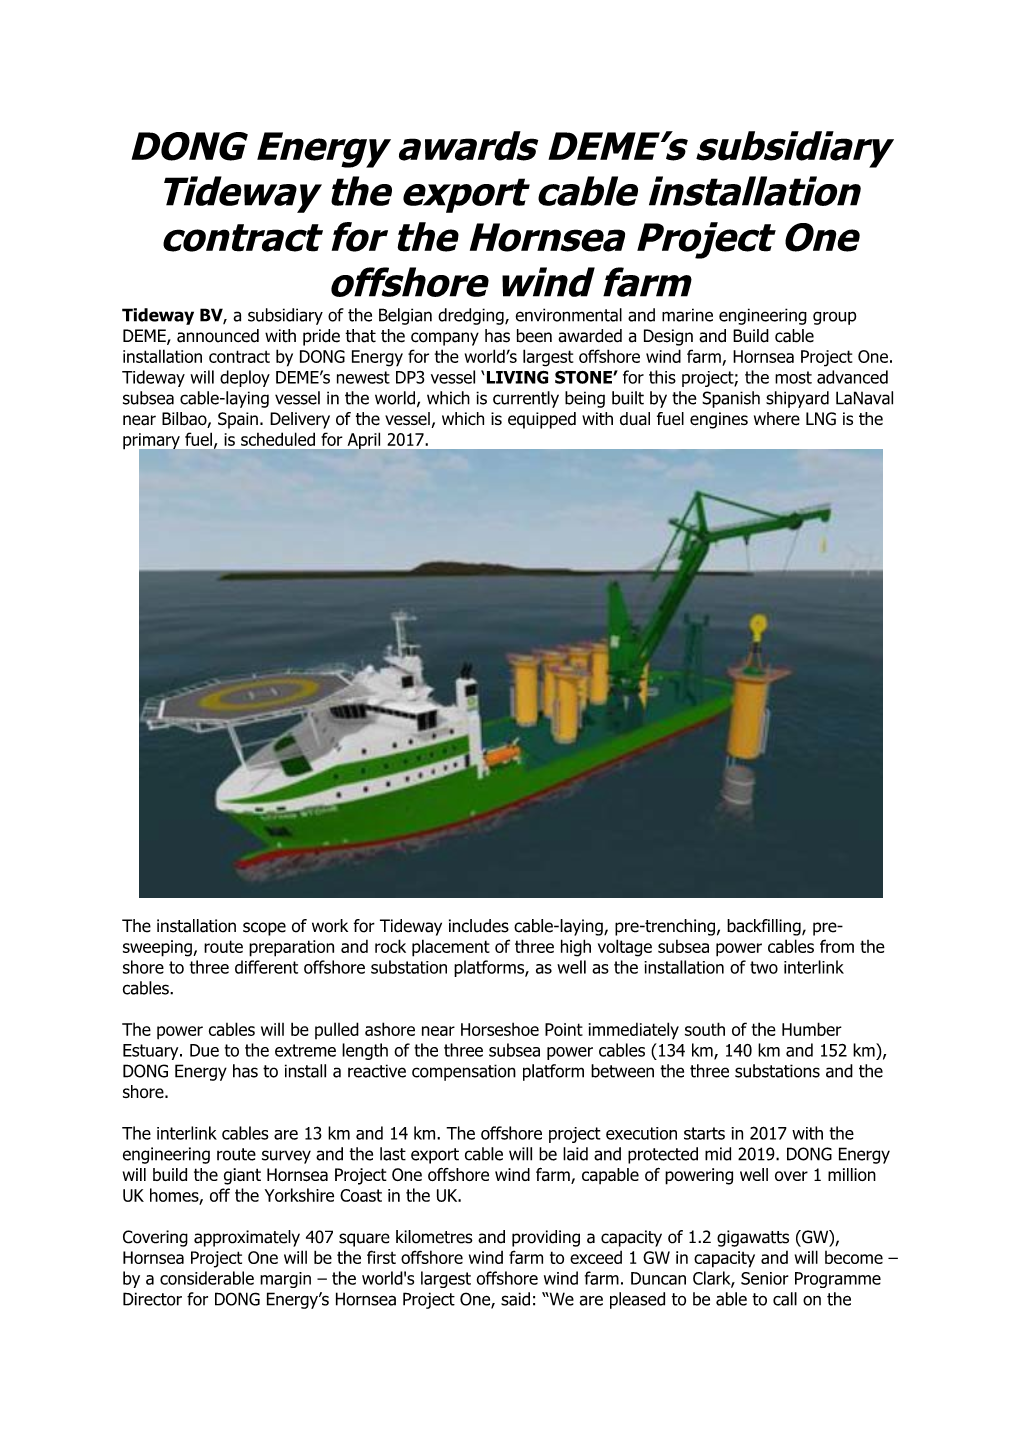 DONG Energy Awards DEME S Subsidiary Tideway the Export Cable Installation Contract For